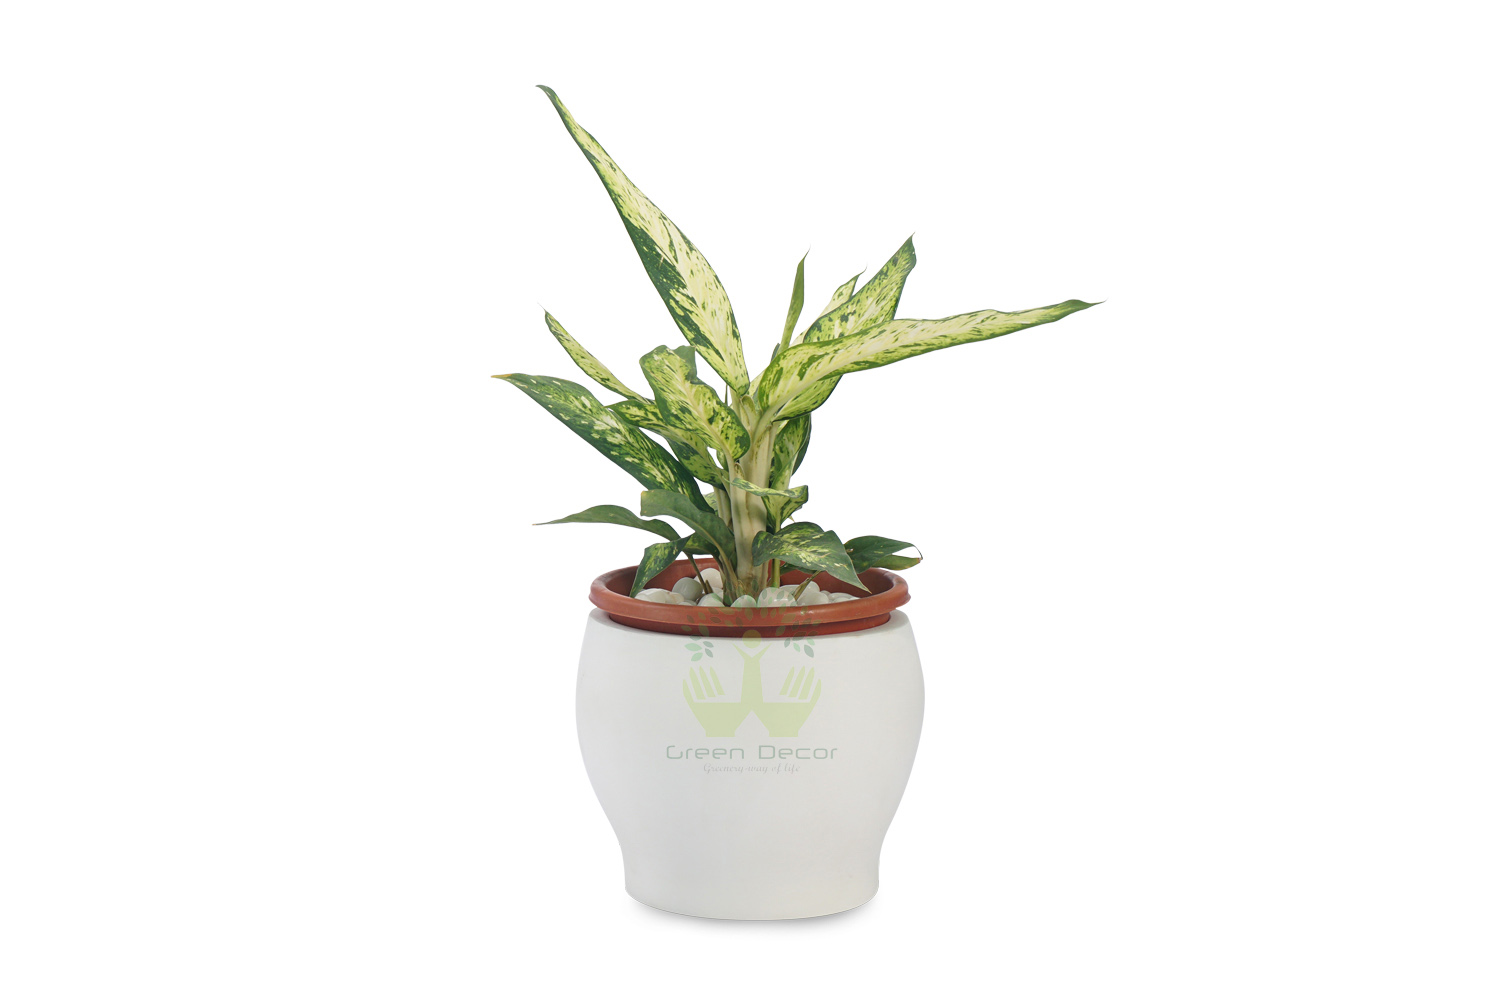 Buy Dieffenbachia Plants , White Pots and seeds in Delhi NCR by the best online nursery shop Greendecor.